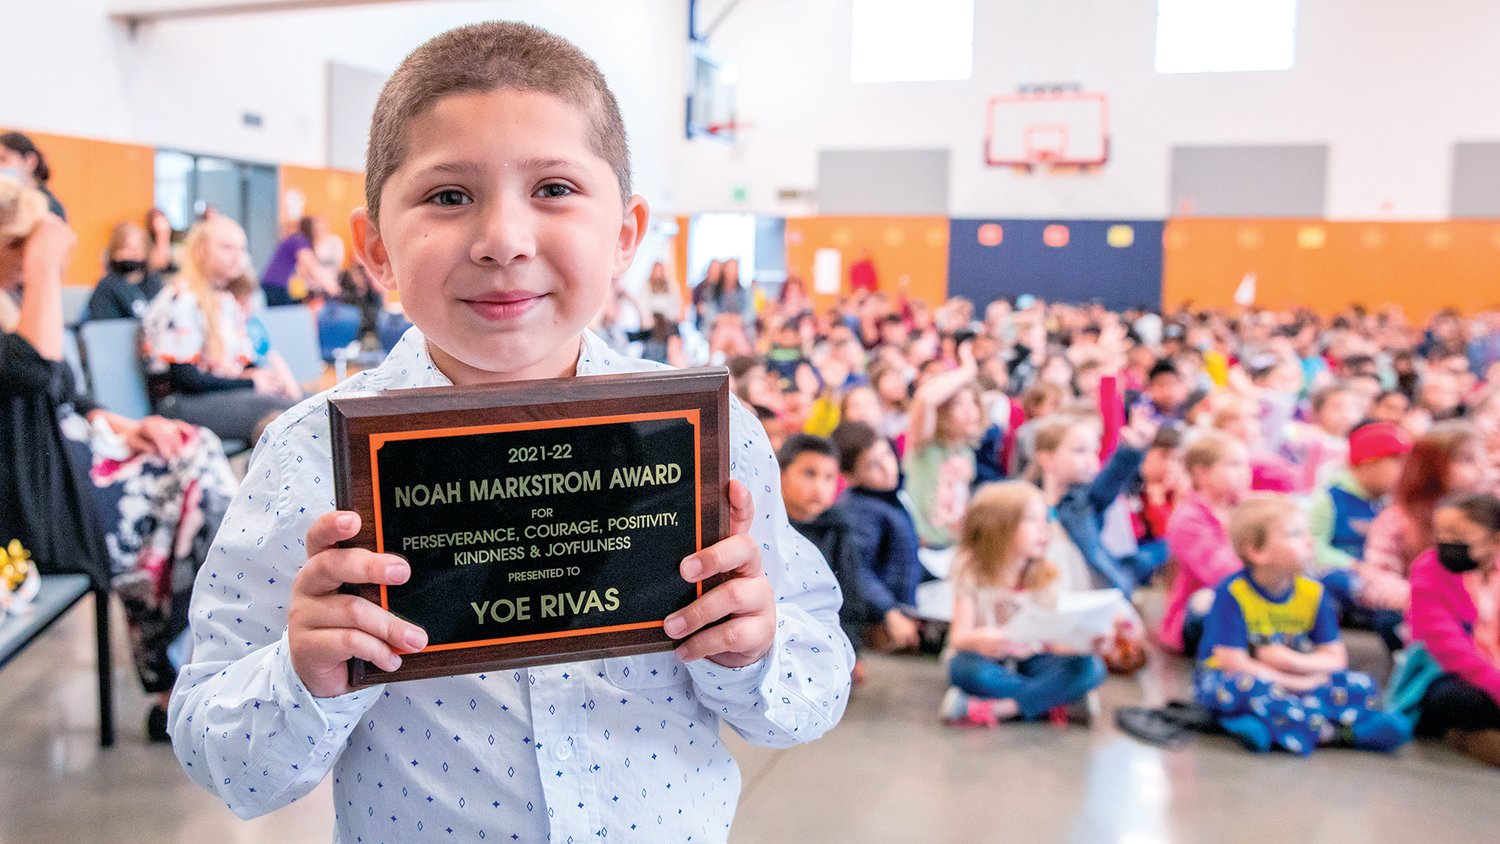 Yoe Rivas holds up a plaque after being named the Noah Markstrom Award recipient Friday at Fords Prairie Elementary in Centralia.